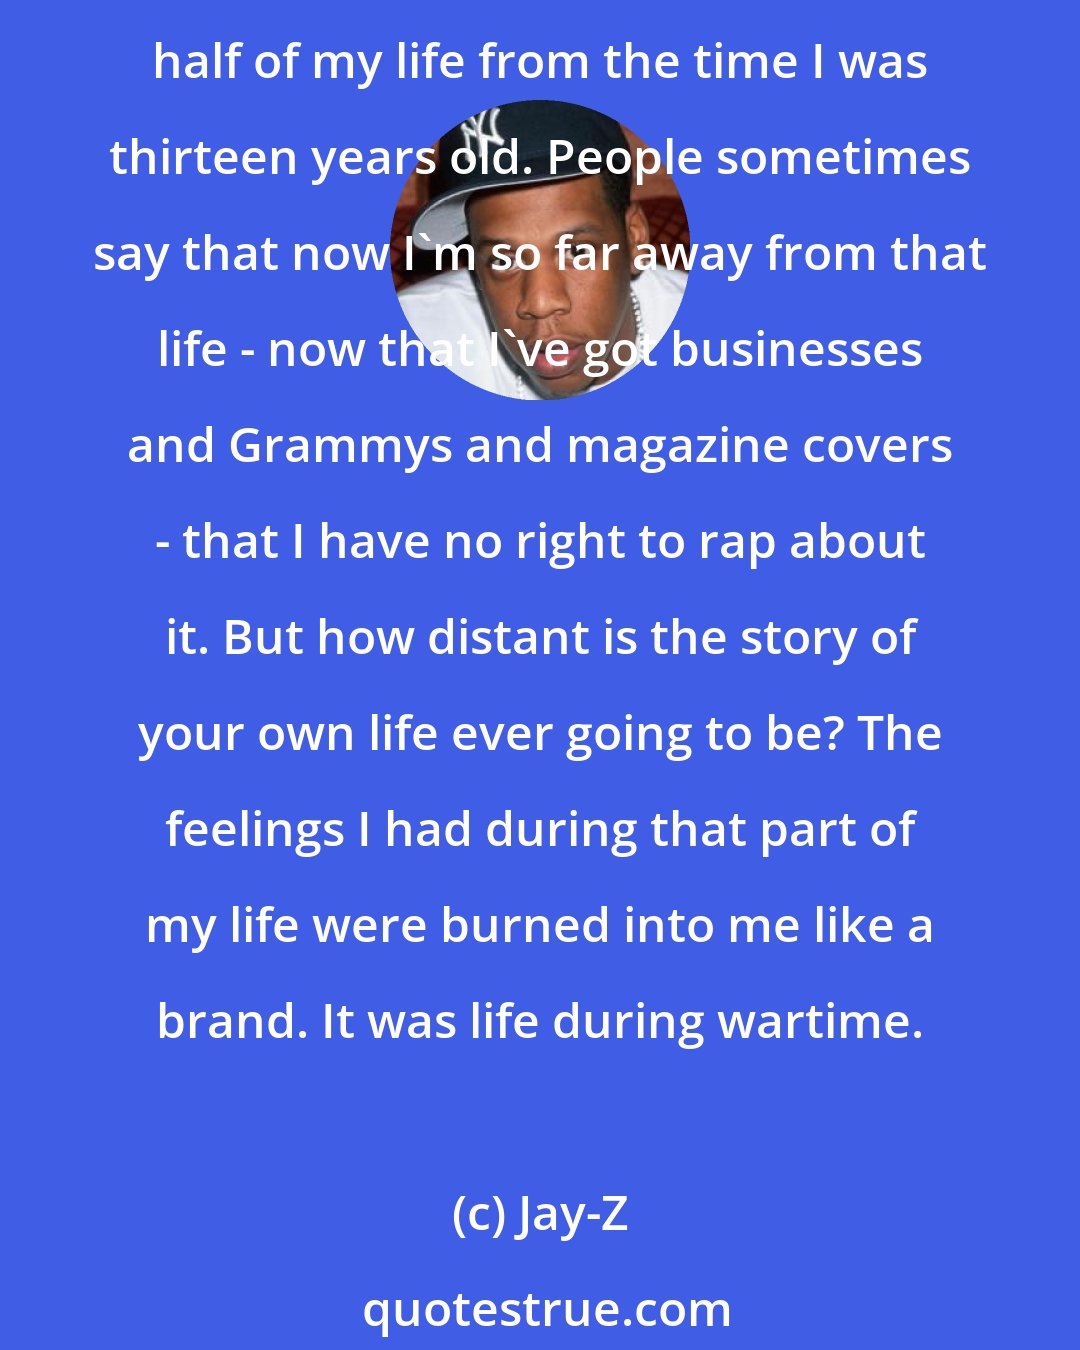 Jay-Z: My life after childhood has two main stories: the story of the hustler and the story of the rapper, and the two overlap as much as they diverge. I was on the streets for more than half of my life from the time I was thirteen years old. People sometimes say that now I'm so far away from that life - now that I've got businesses and Grammys and magazine covers - that I have no right to rap about it. But how distant is the story of your own life ever going to be? The feelings I had during that part of my life were burned into me like a brand. It was life during wartime.